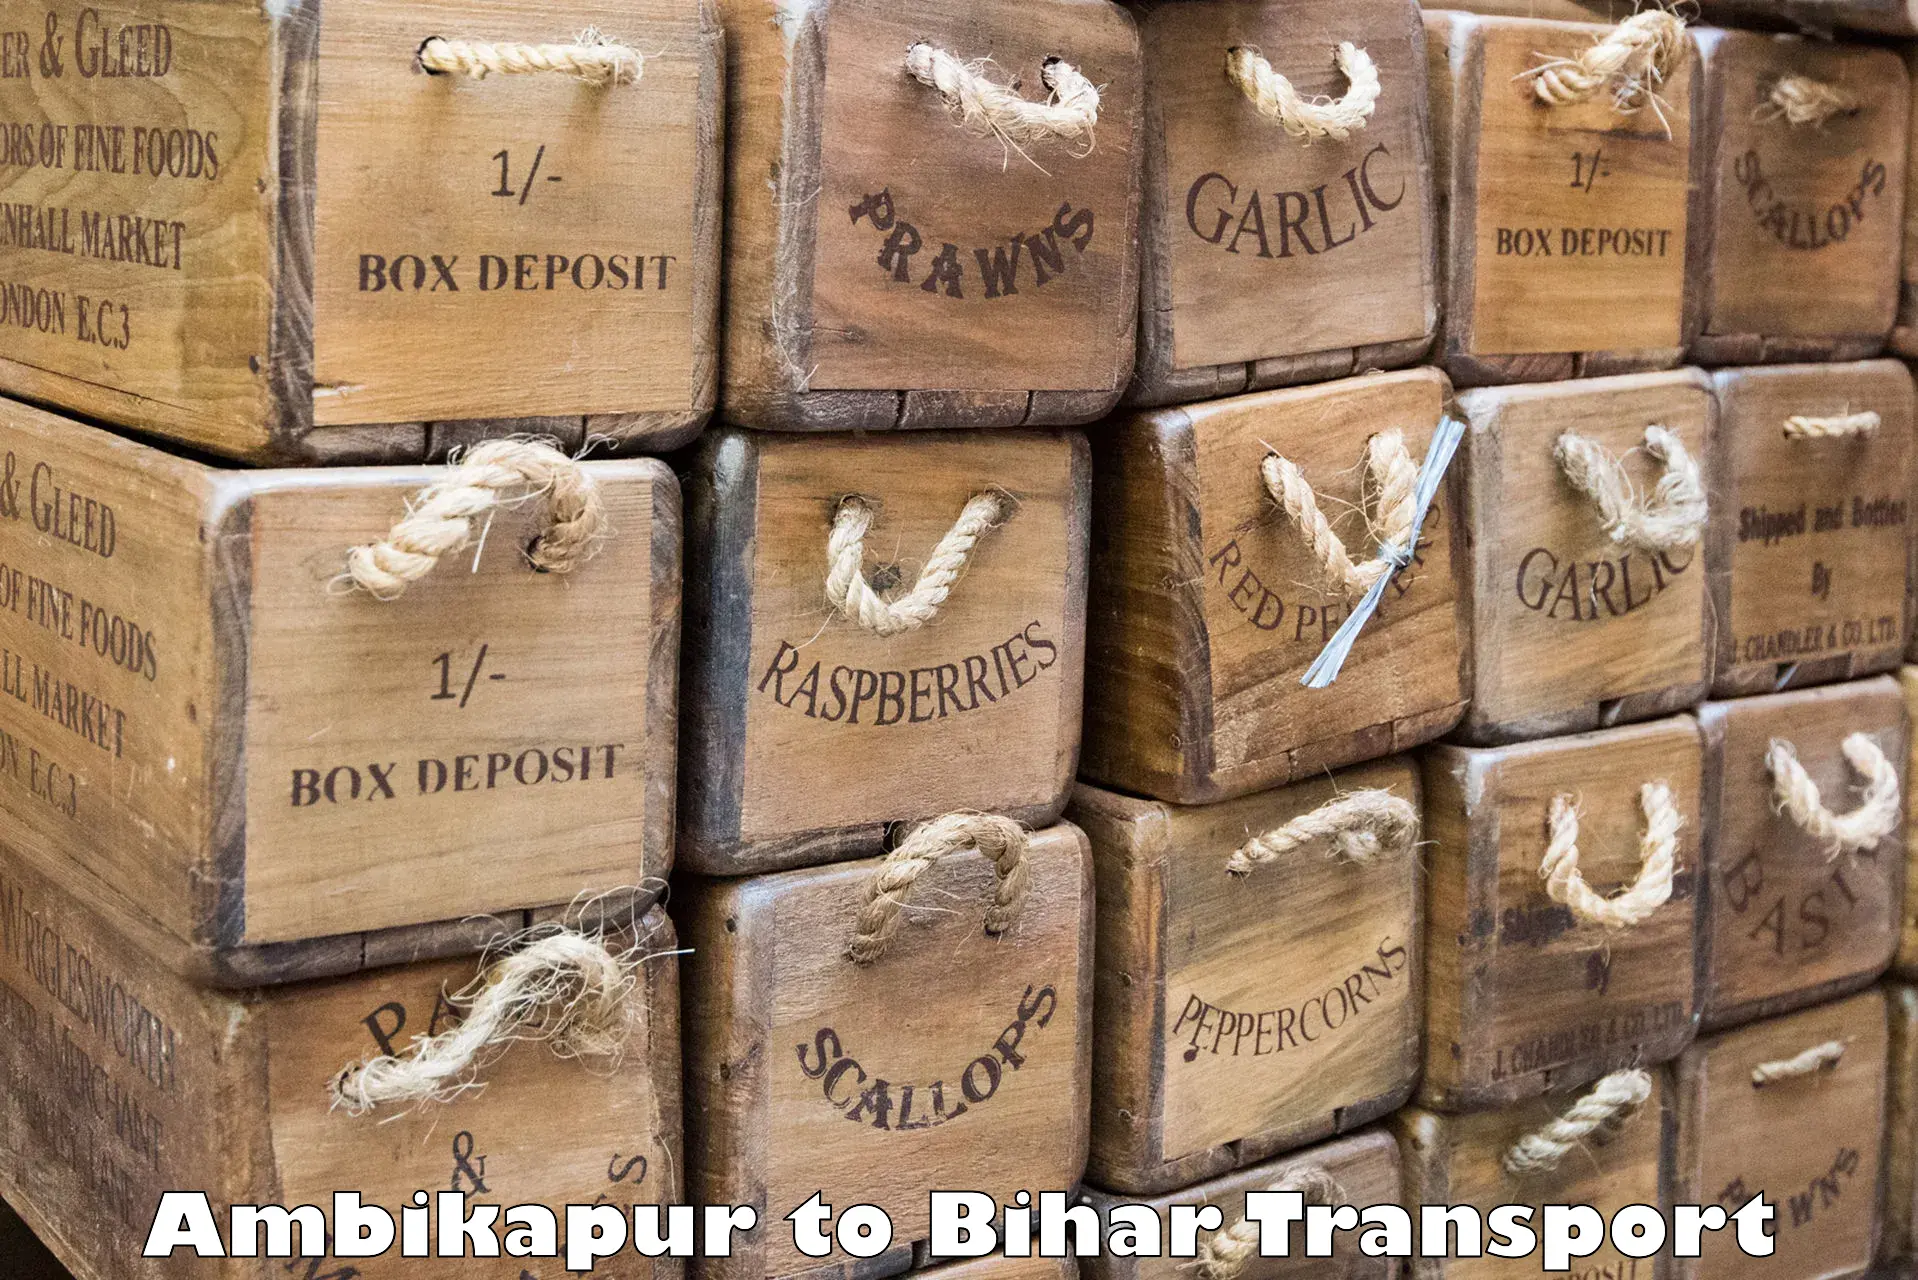 Commercial transport service Ambikapur to Samastipur